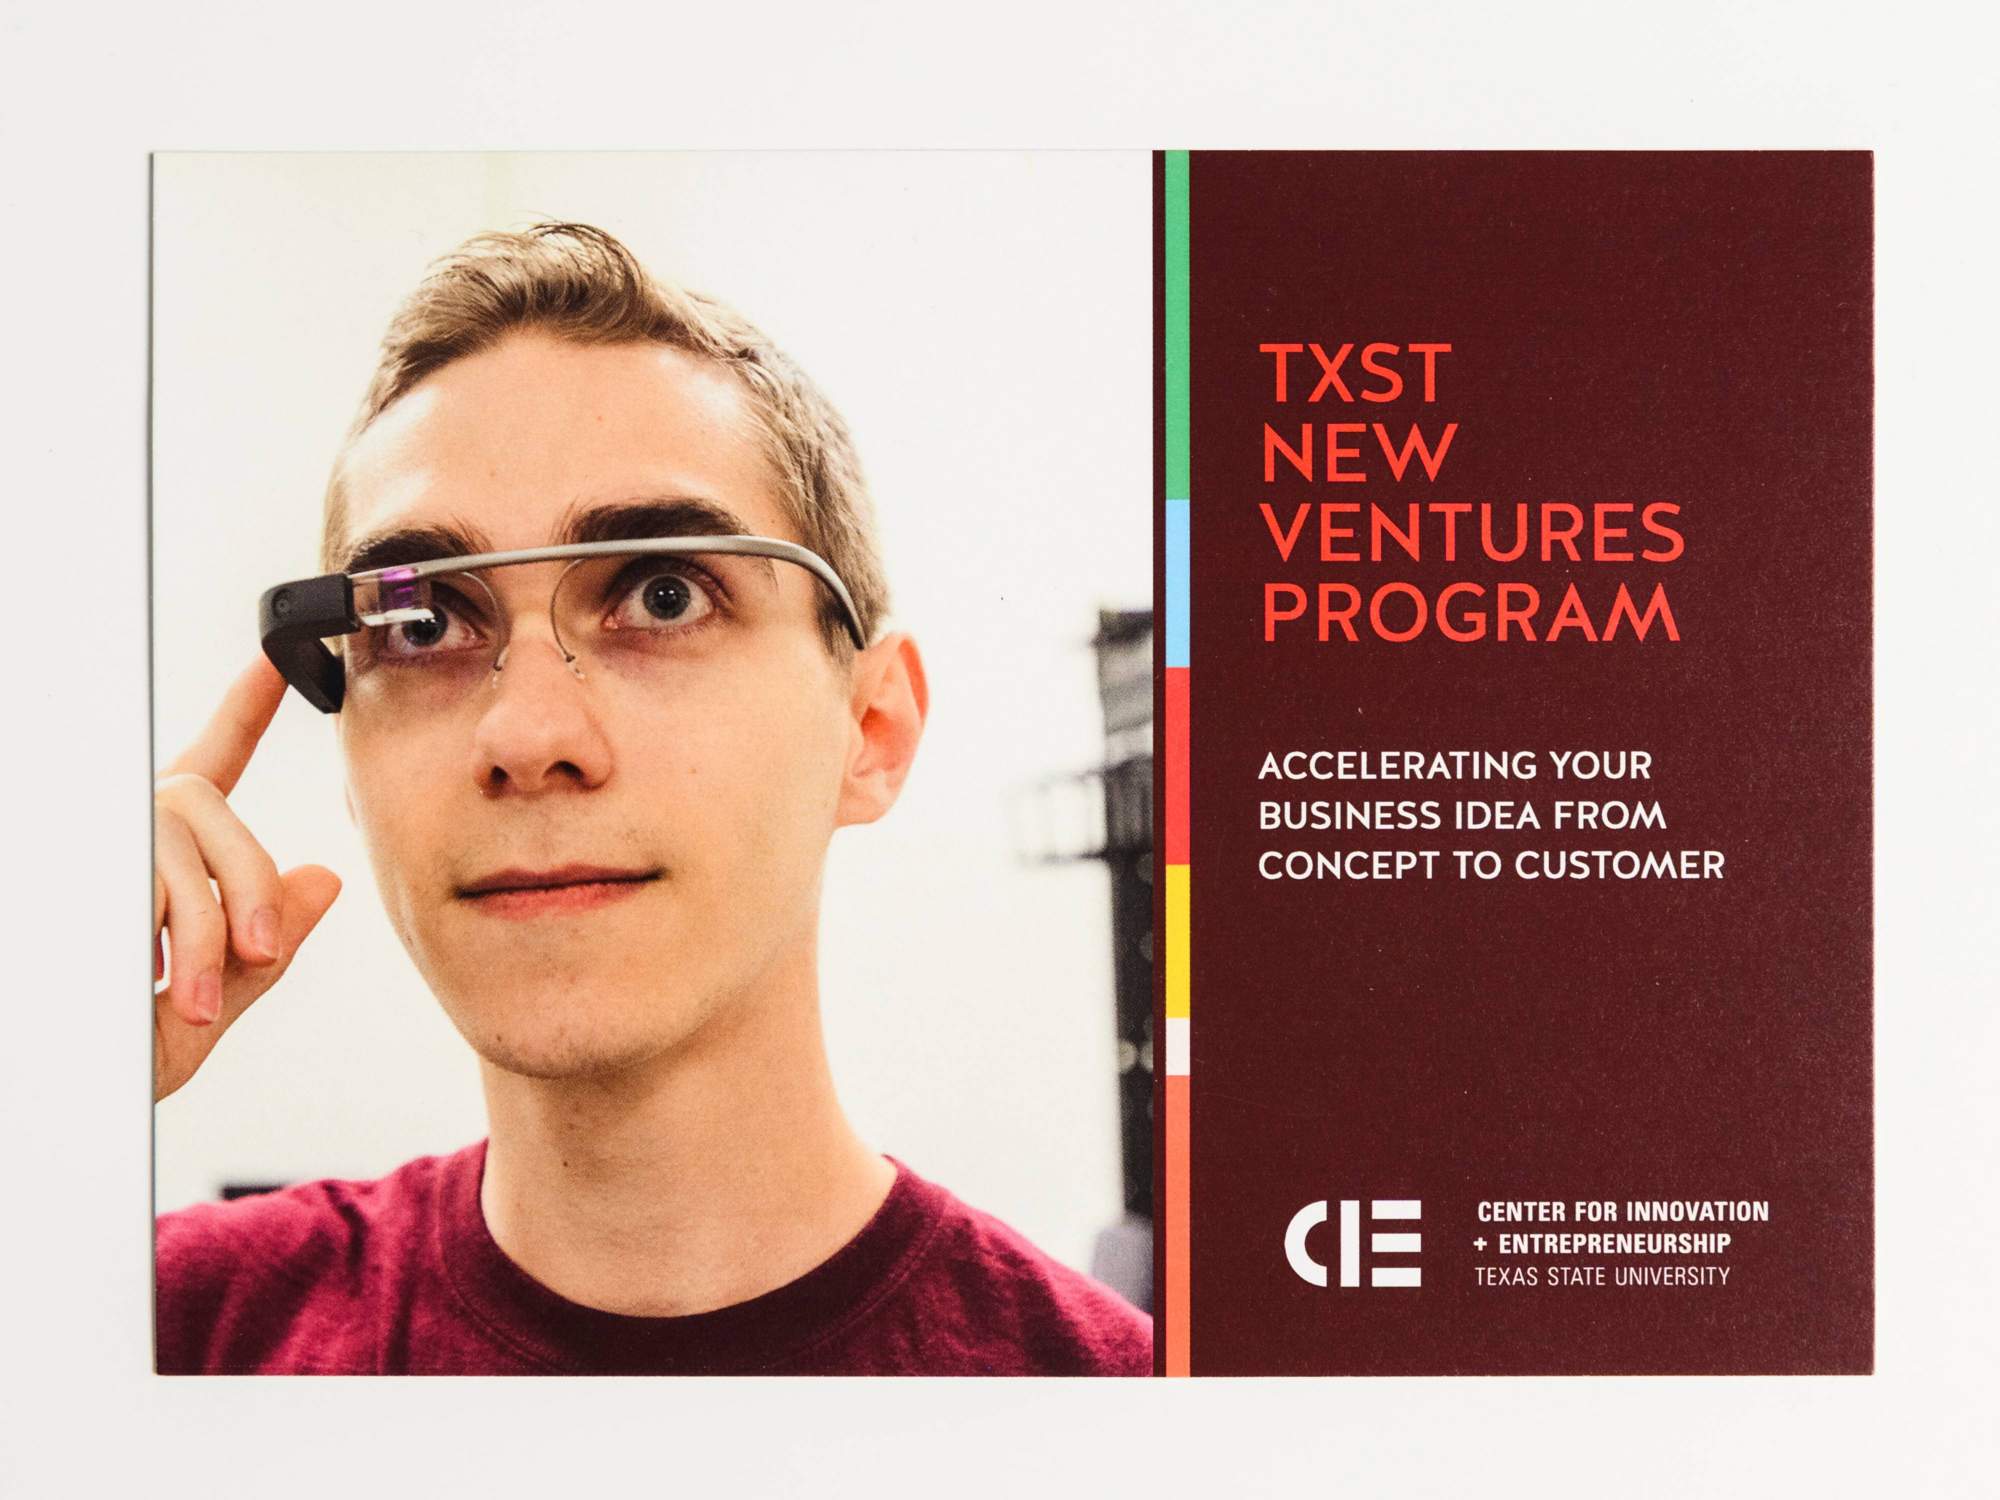 Postcard about the TXST new ventures program made using a template